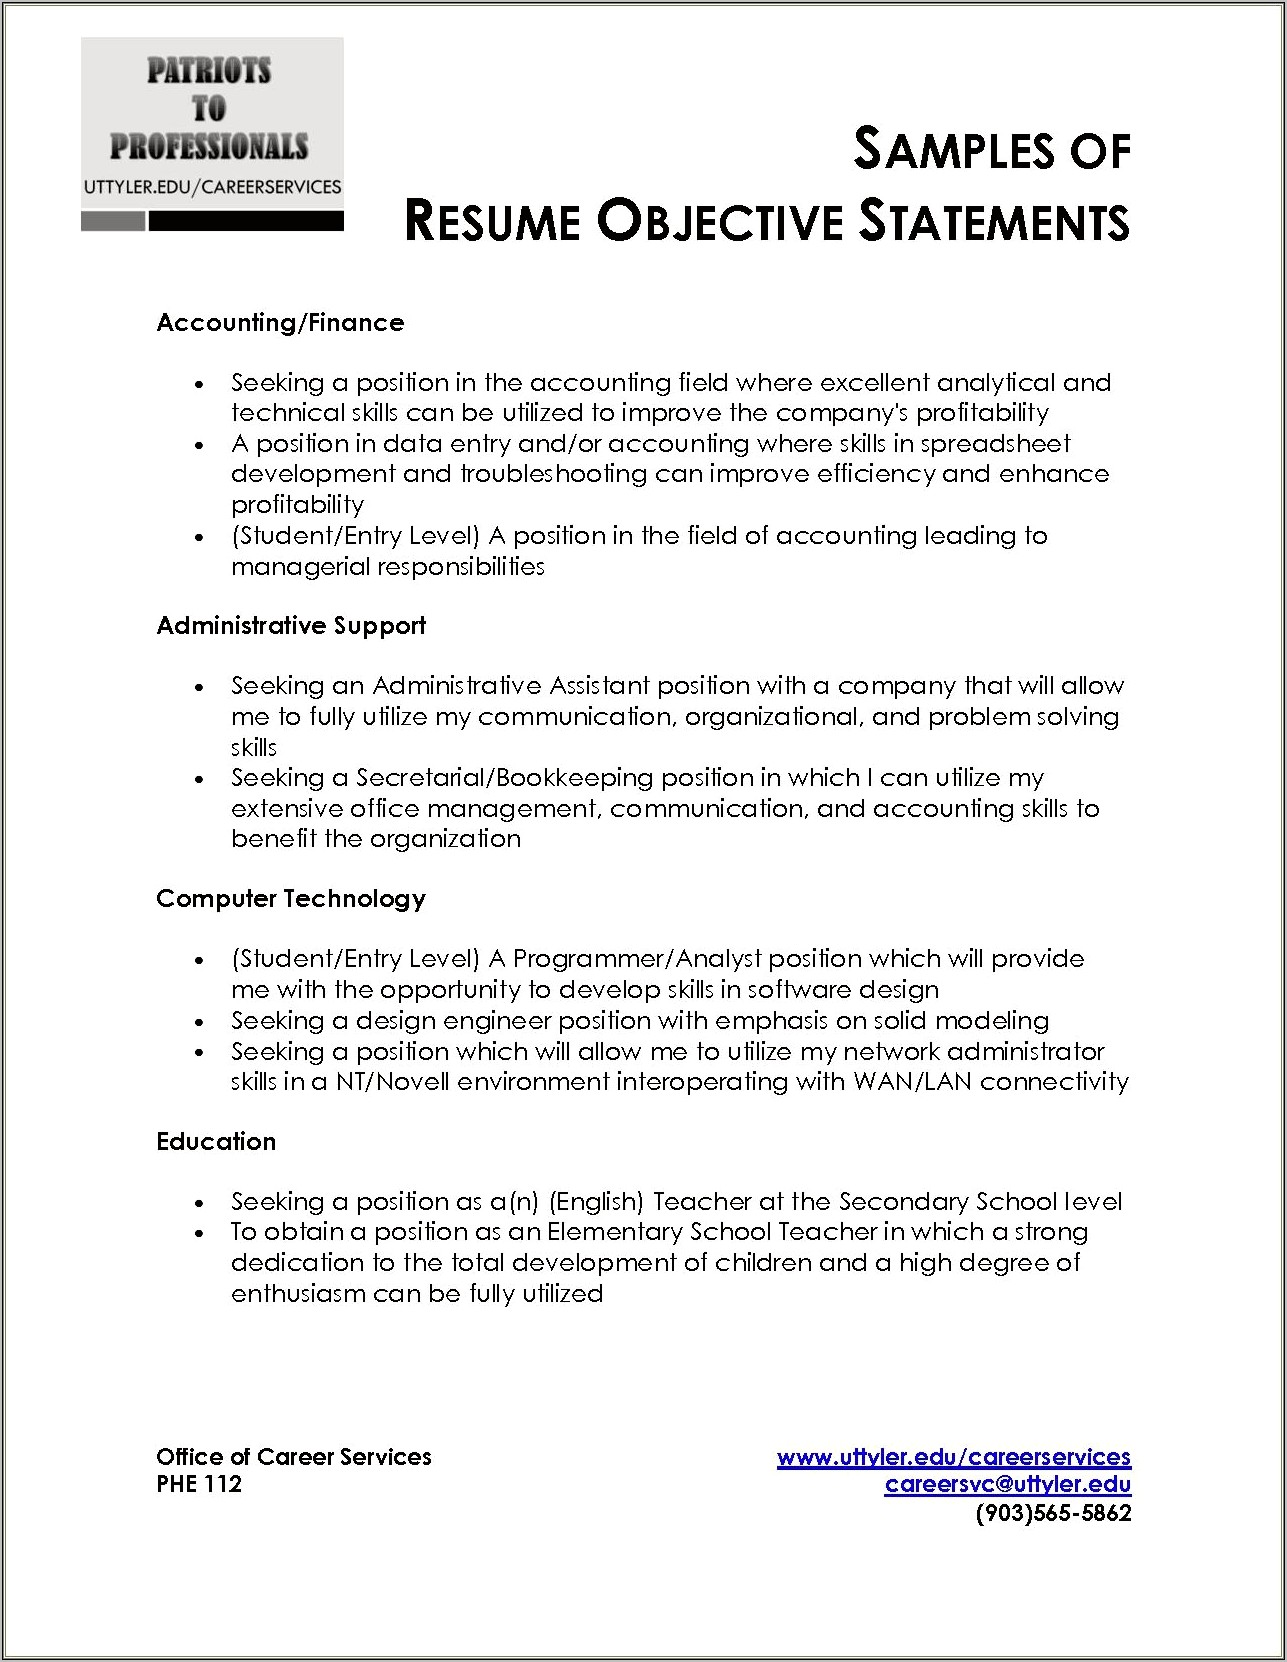 Resume Objective Statement It Professional